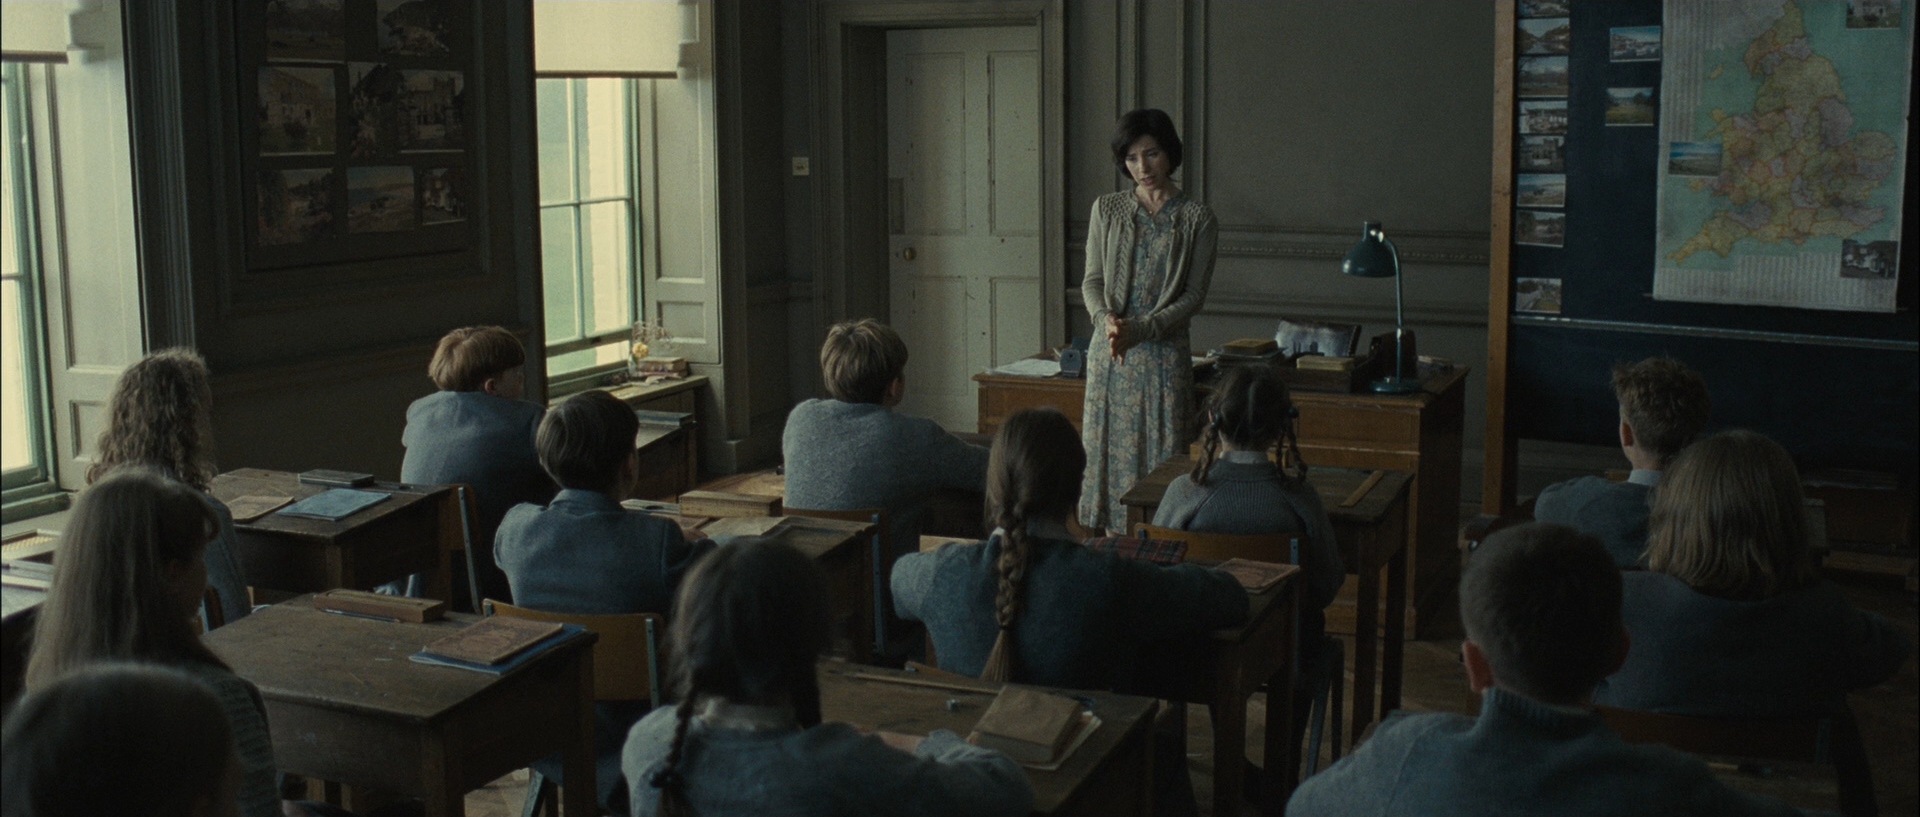 Students and a teacher in a classroom at Hailsham, from the movie adaptation of Never Let Me Go